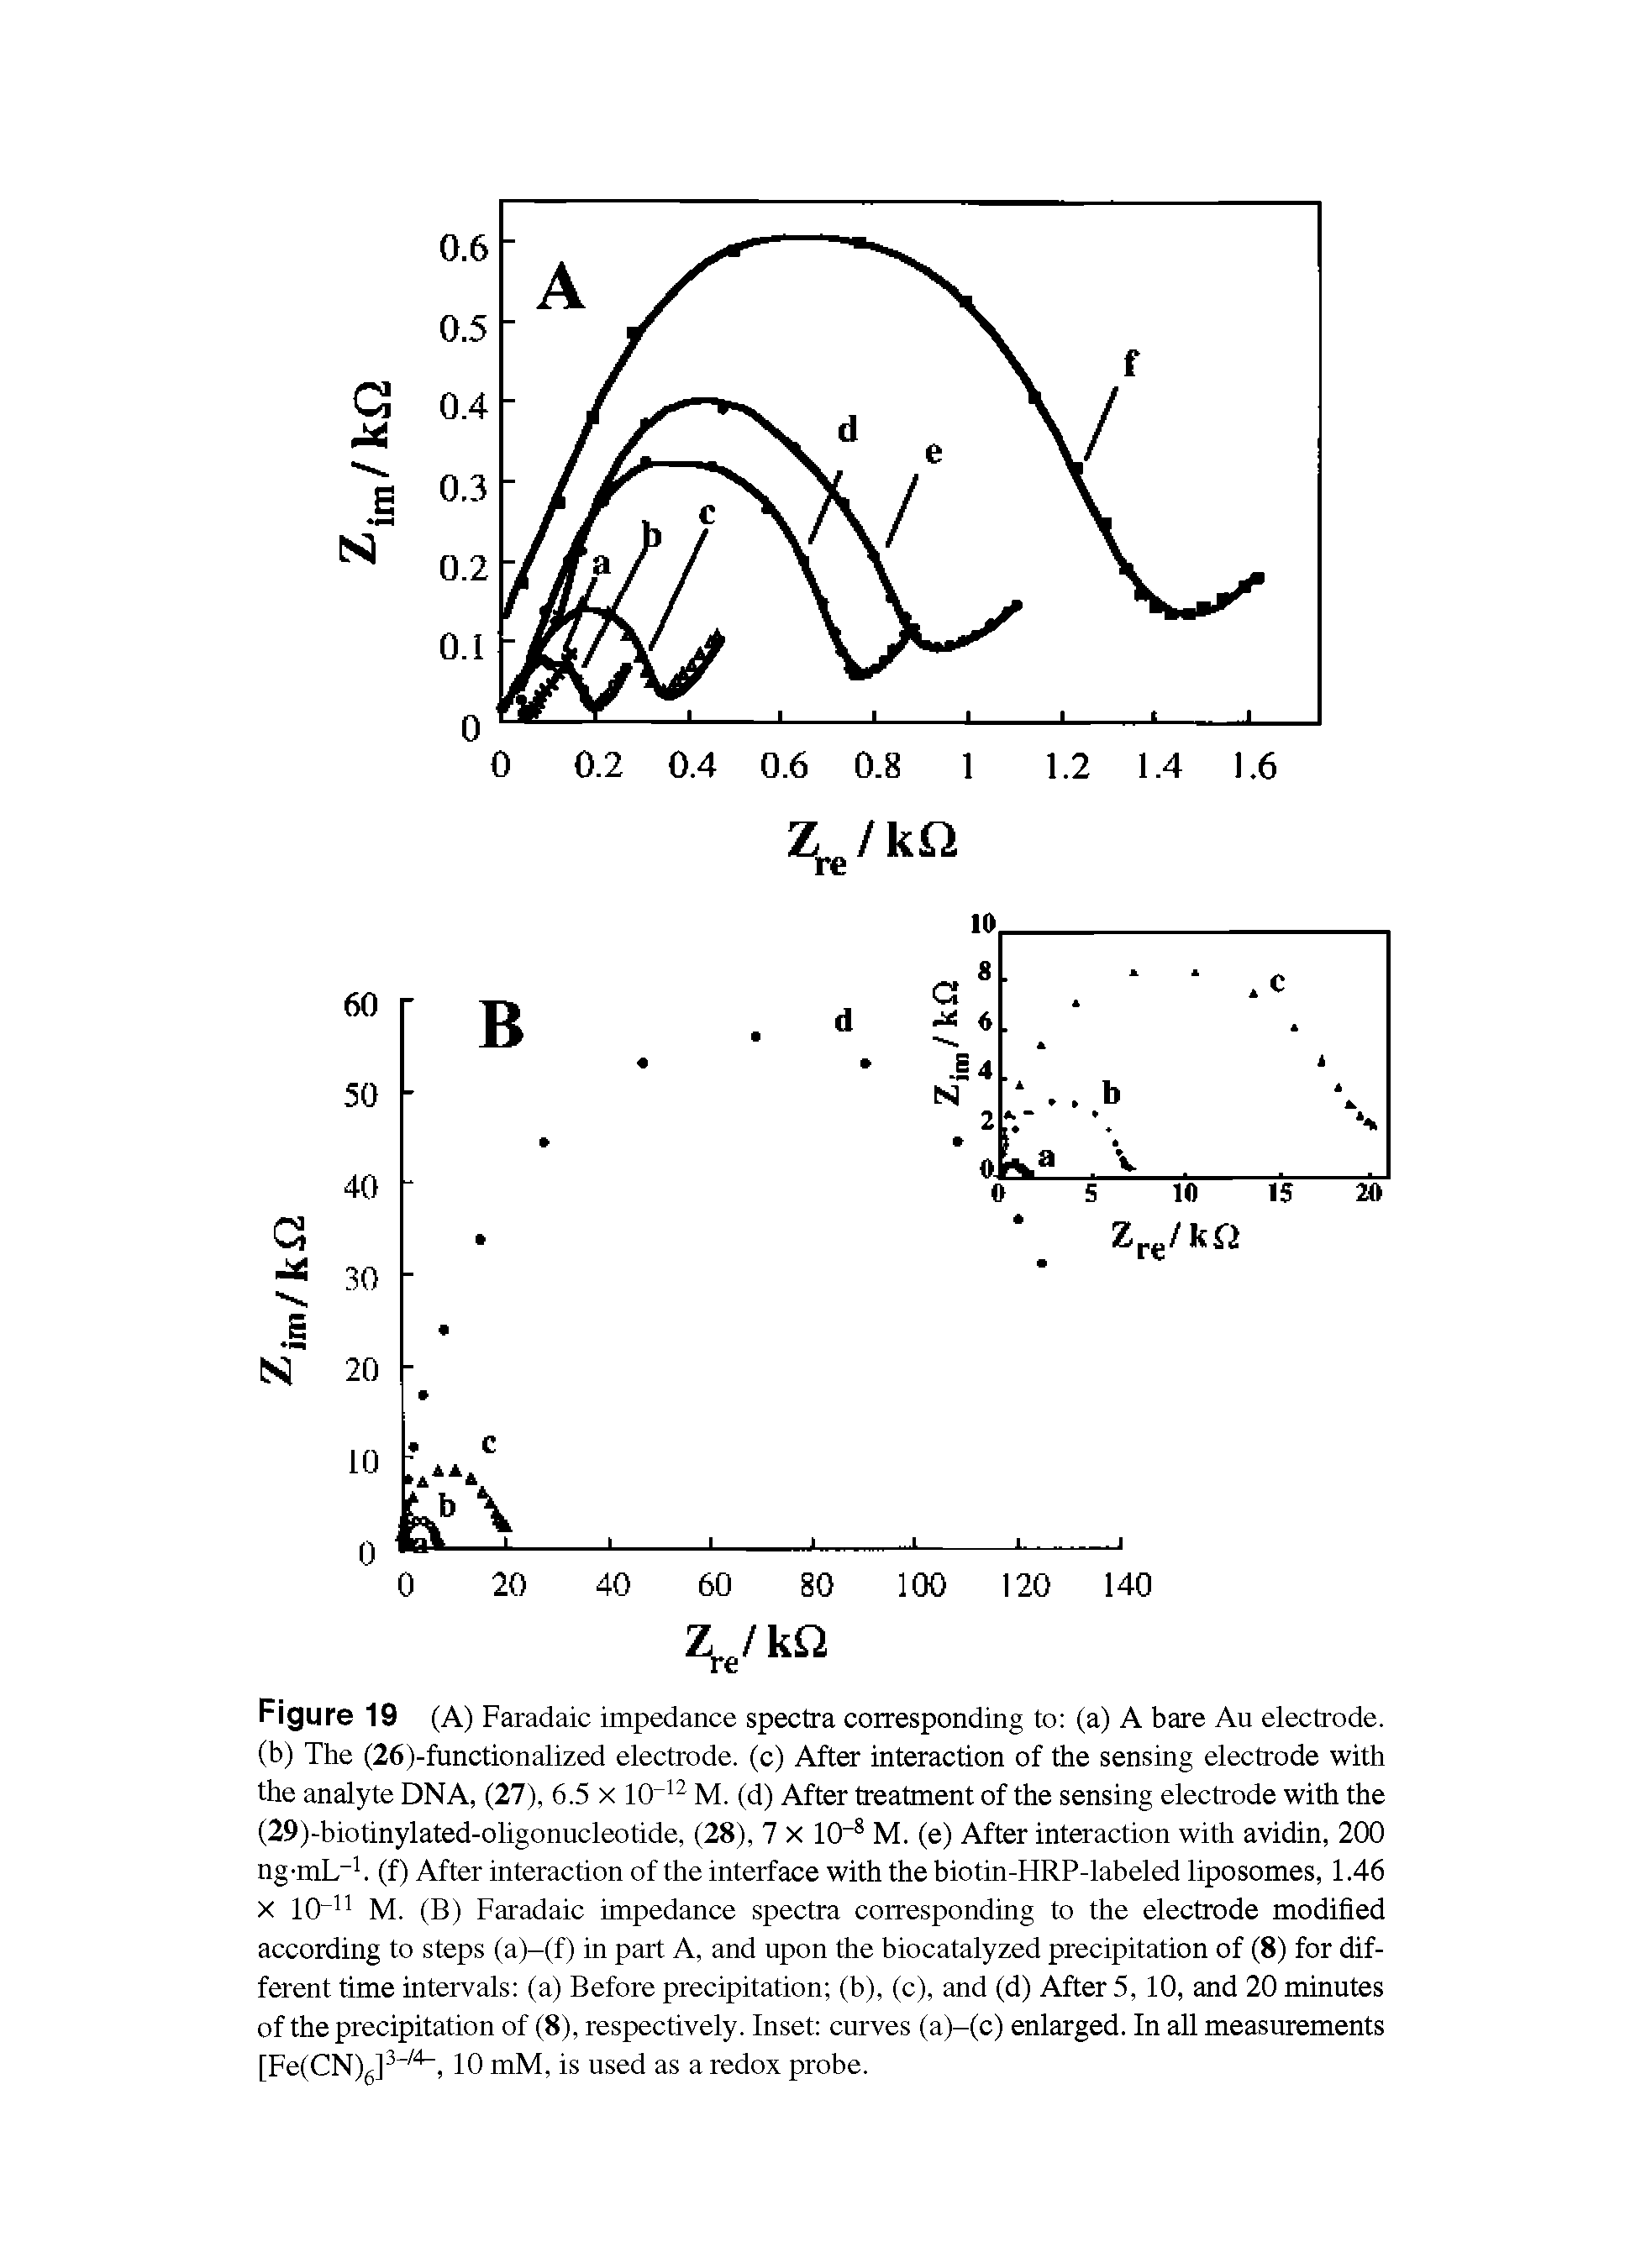 Figure 19 (A) Faradaic impedance spectra corresponding to (a) A bare An electrode, (b) The (26)-functionalized electrode, (c) After interaction of the sensing electrode with the analyte DNA, (27), 6.5 x M. (d) After treatment of the sensing electrode with the...